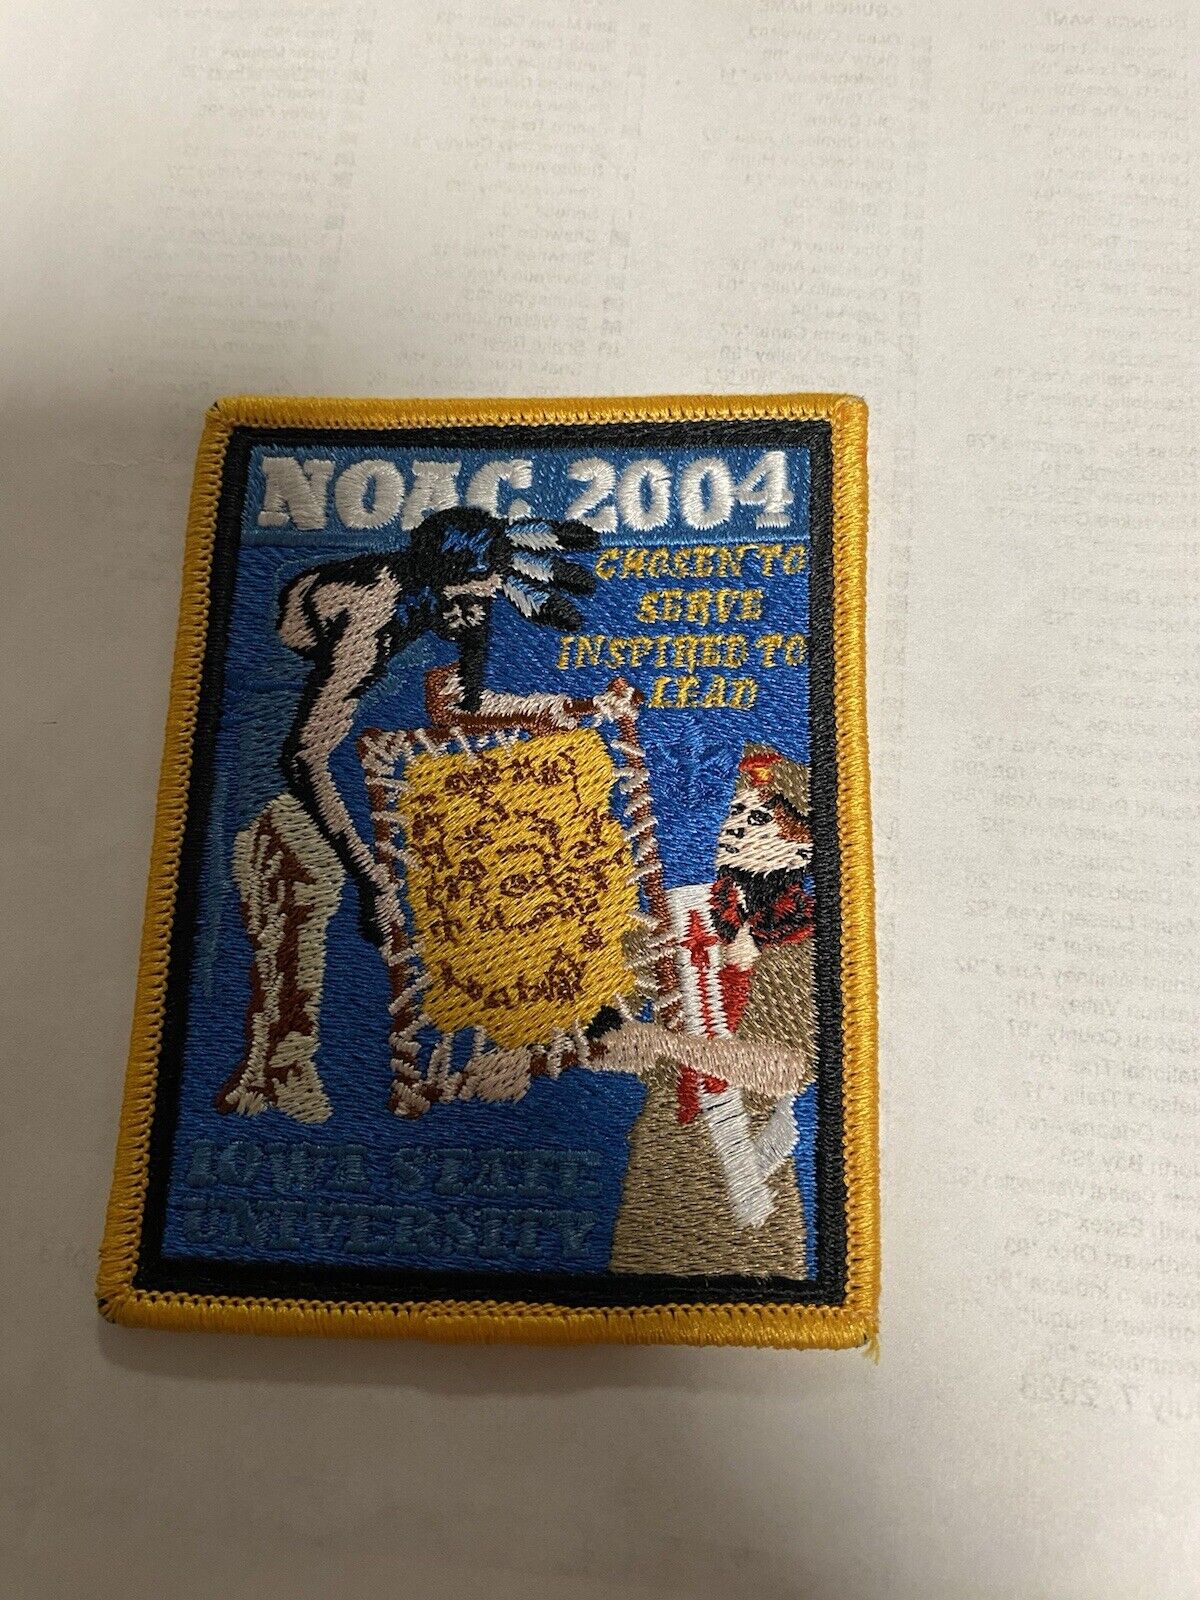 Boy Scout Patch NOAC 2004 Iowa State University Chosen to Serve Inspired to Lead